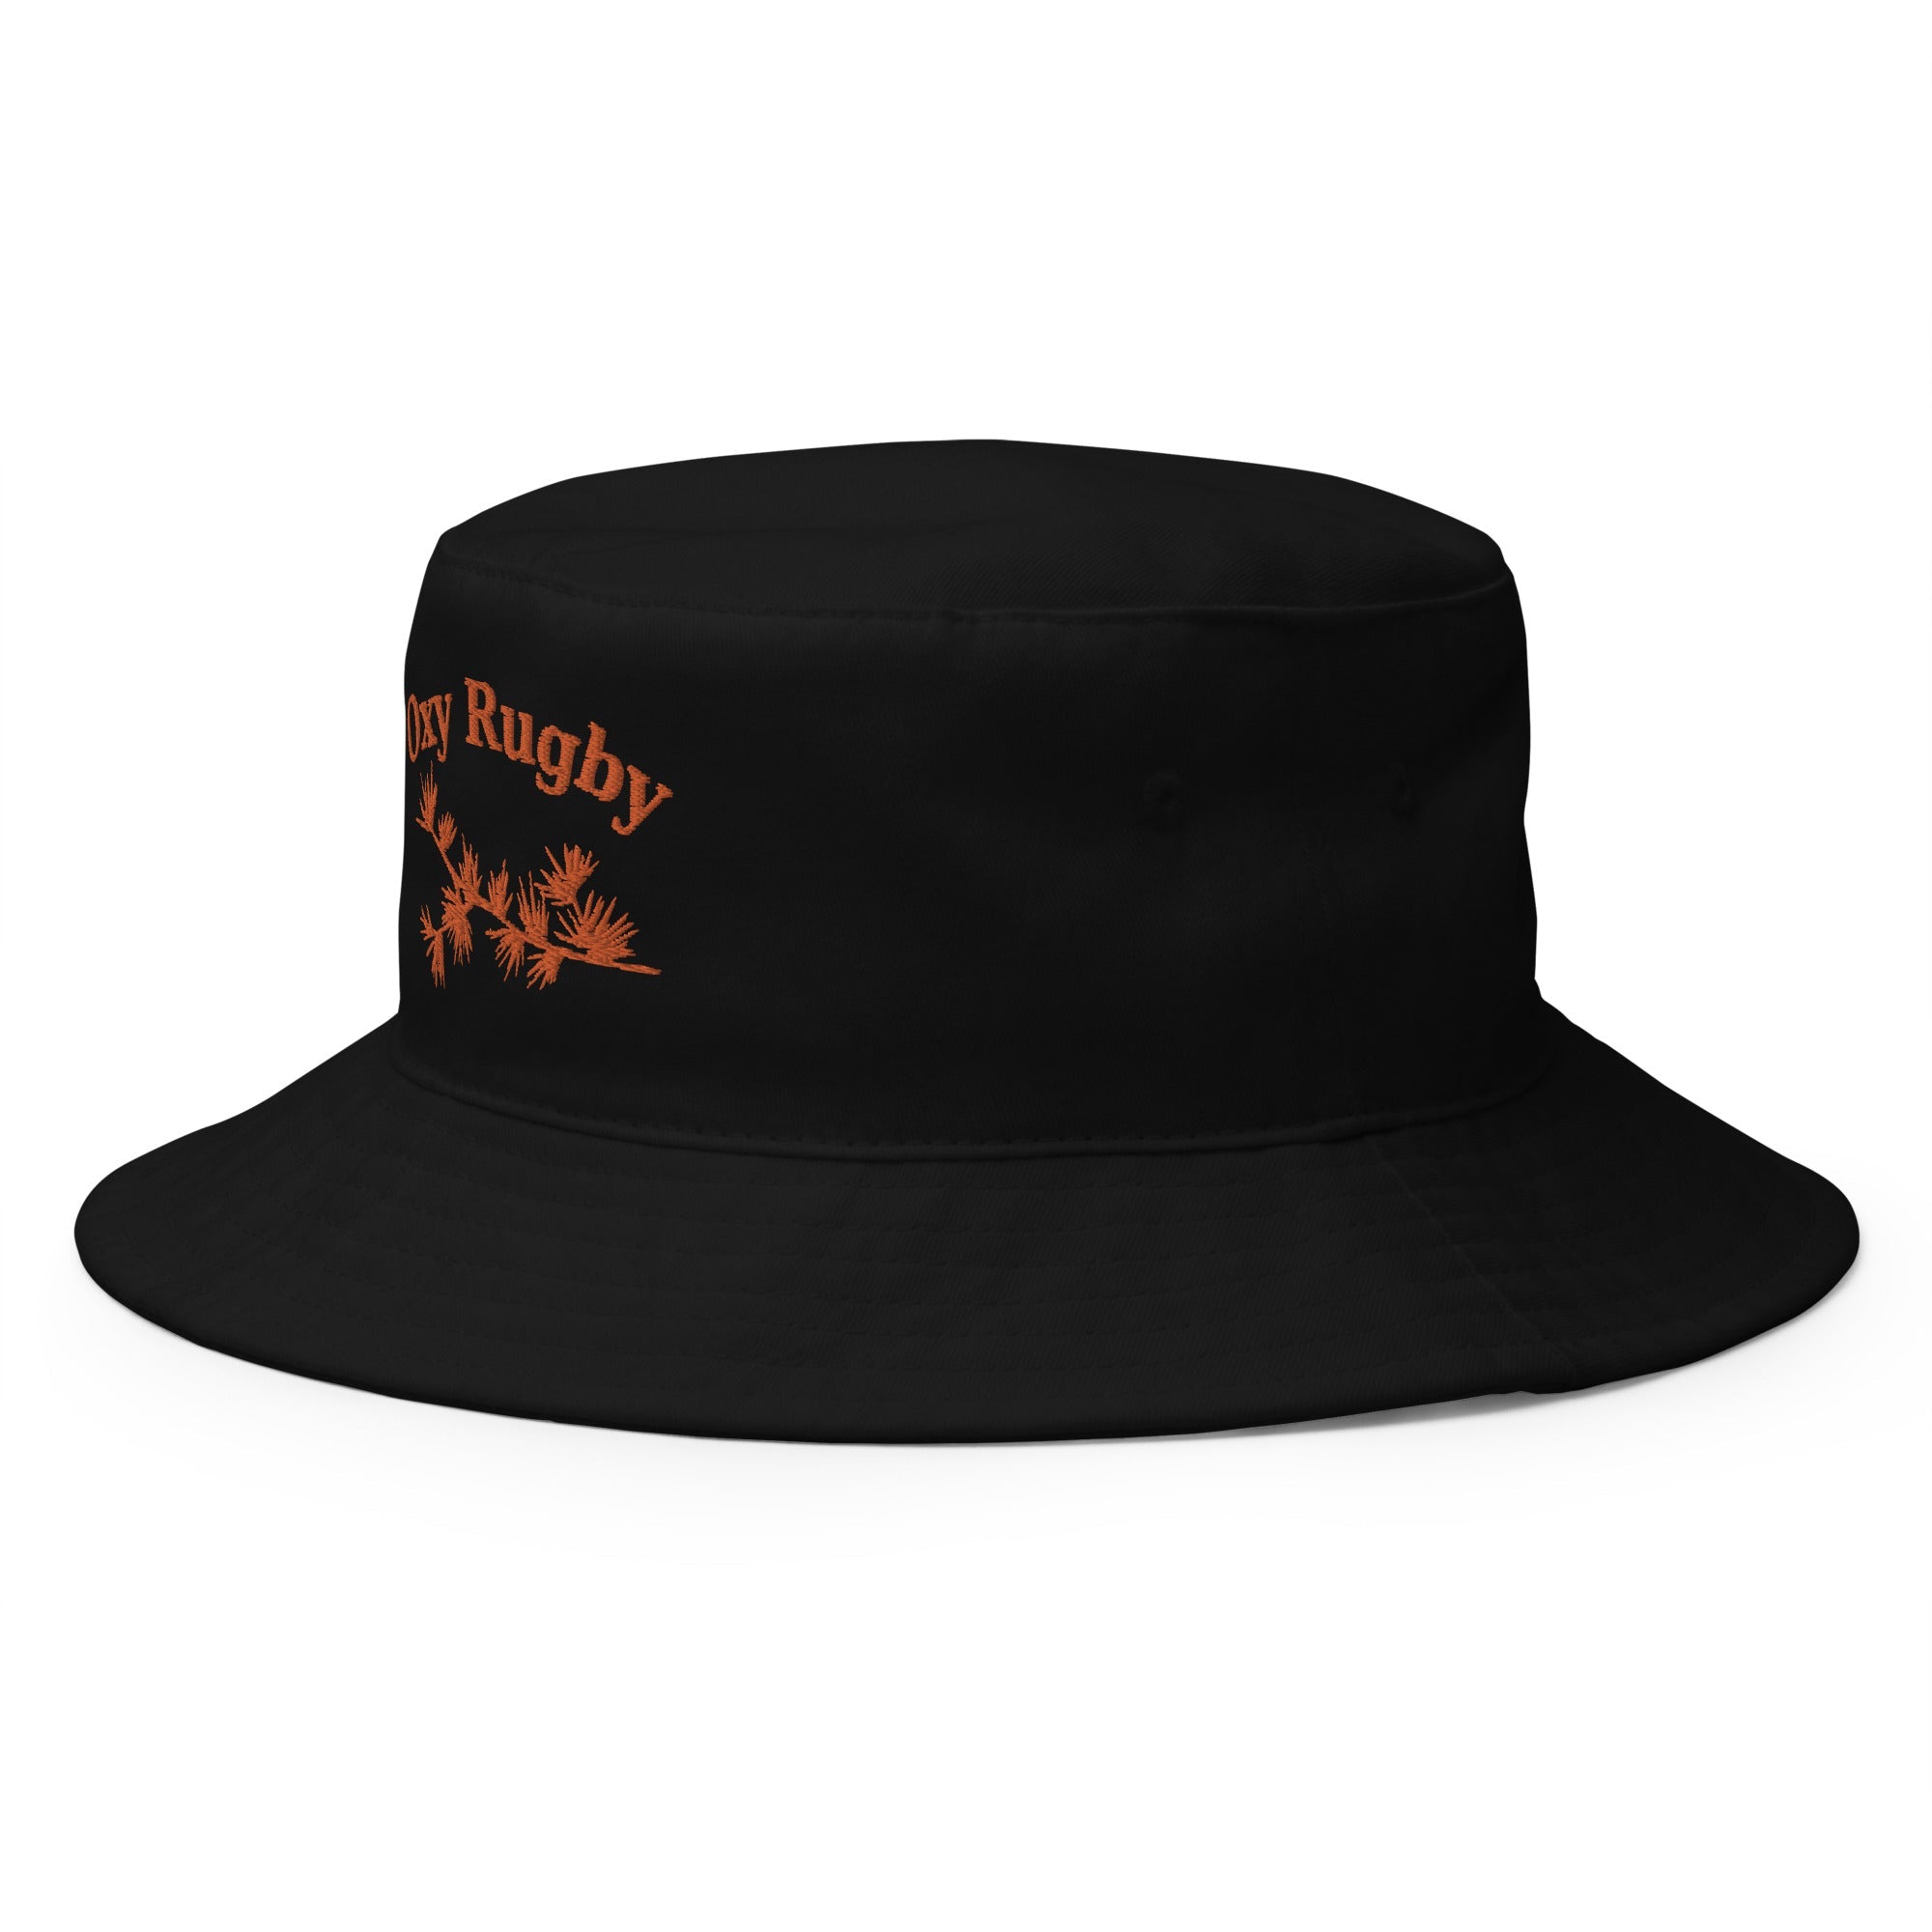 Rugby Imports Oxy Rugby Bucket Hat